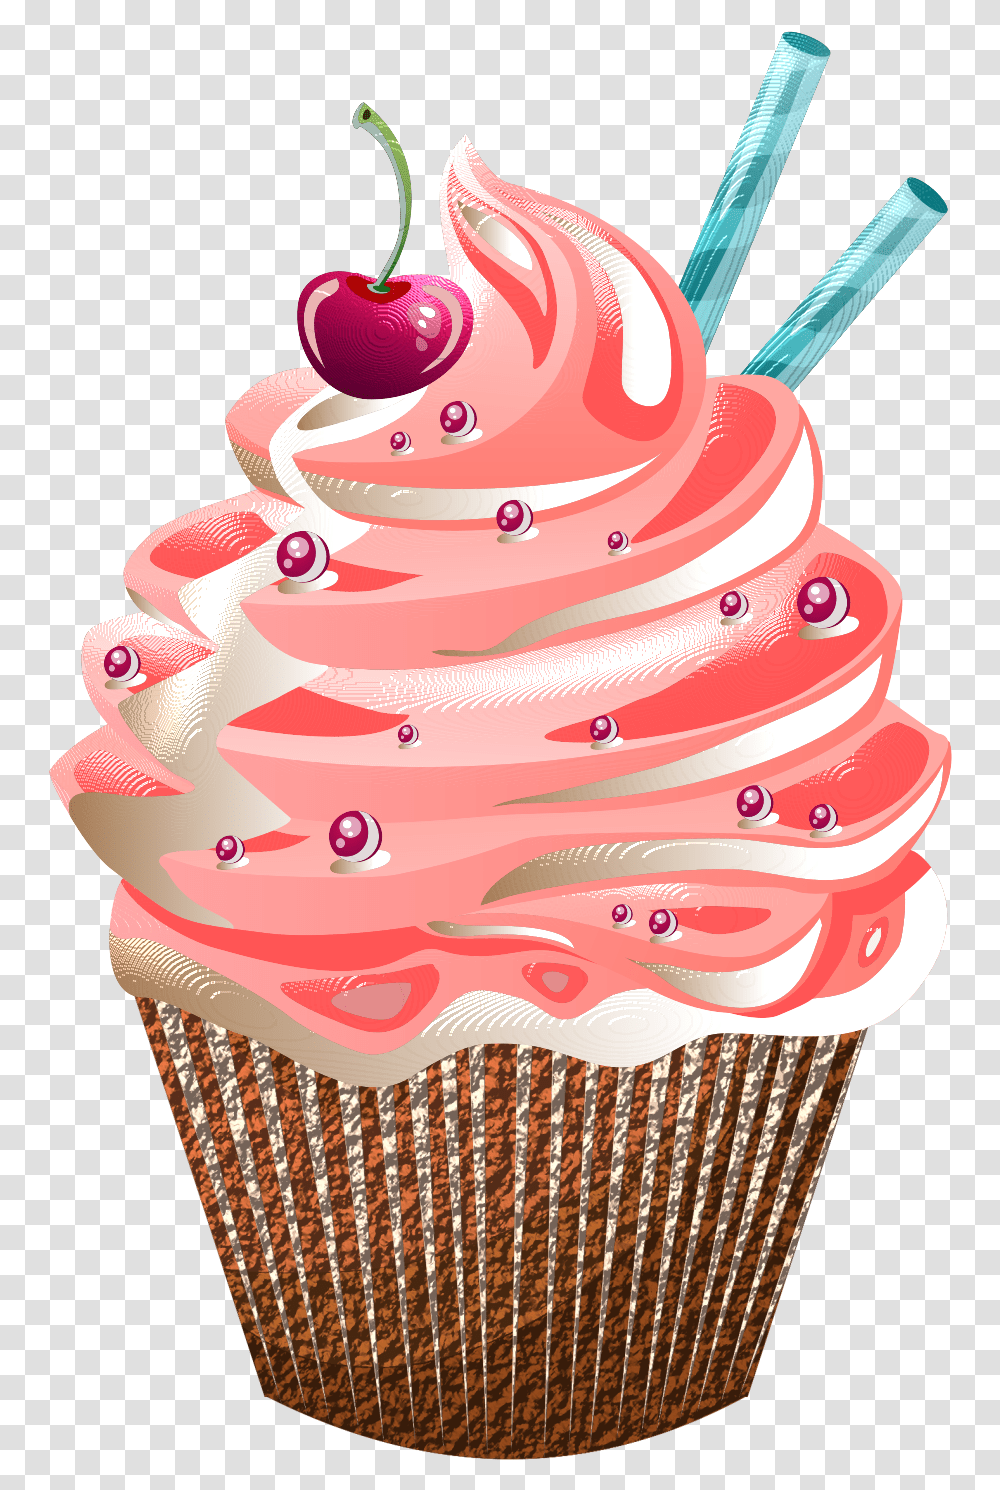 Cupcake Cakes Bakery Clip Art Cup Cakes Background, Cream, Dessert, Food, Creme Transparent Png